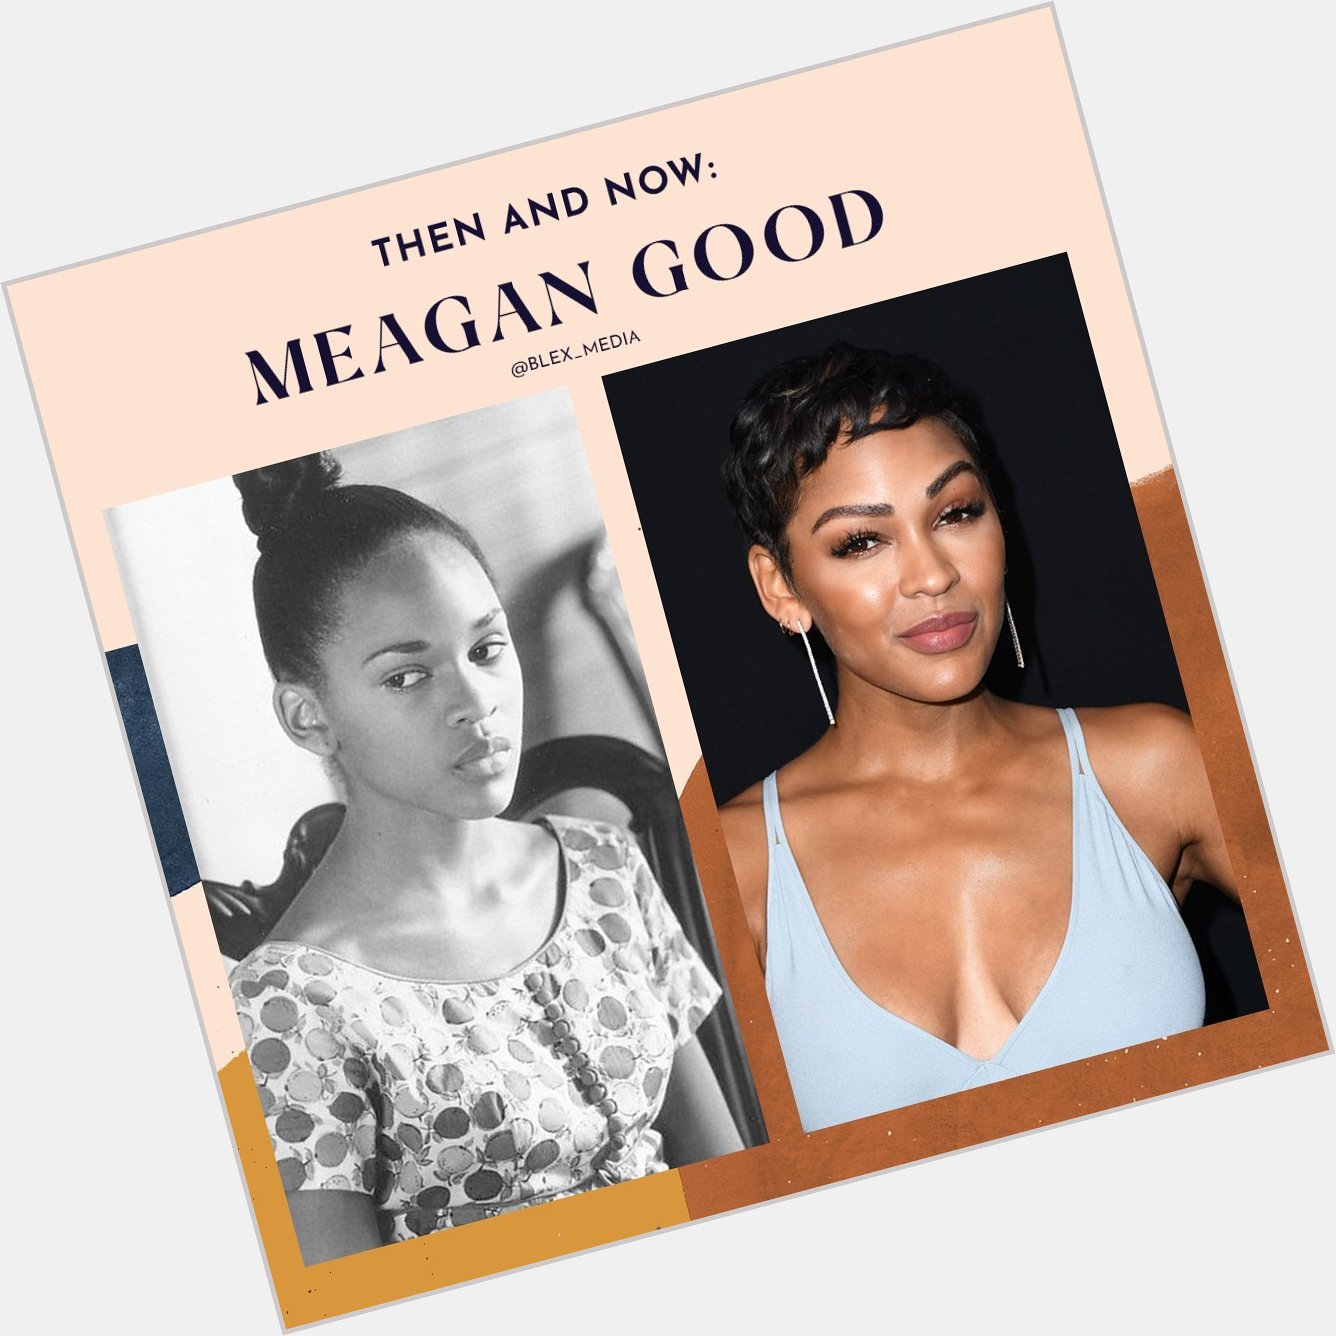 Happy Birthday, Meagan Good! What\s your favorite role of hers? 